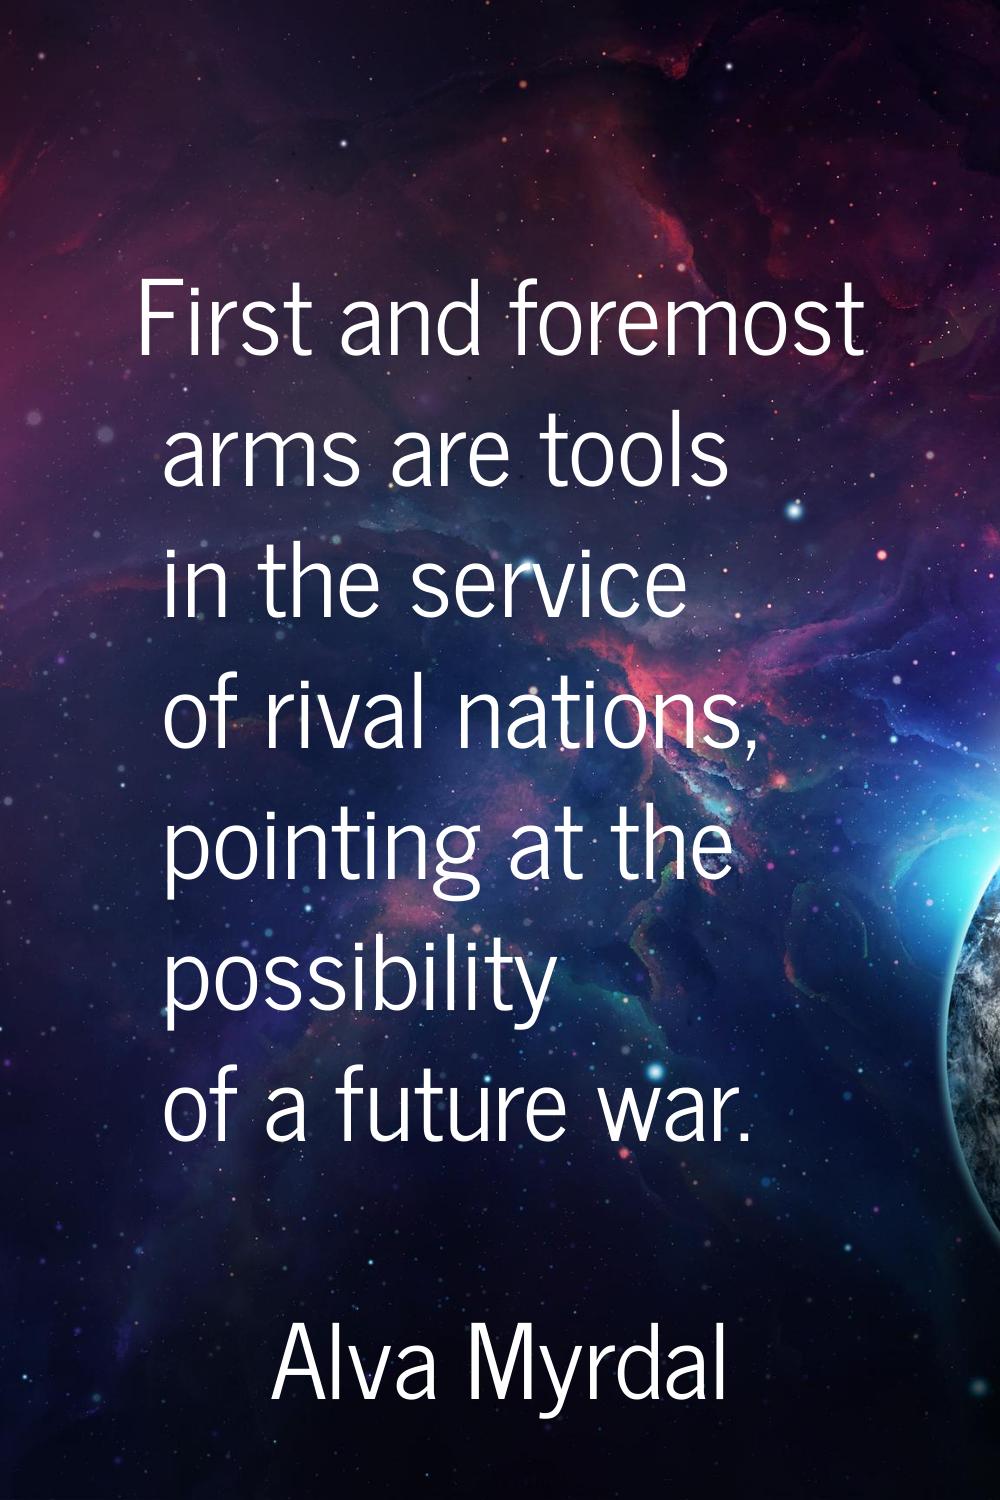 First and foremost arms are tools in the service of rival nations, pointing at the possibility of a